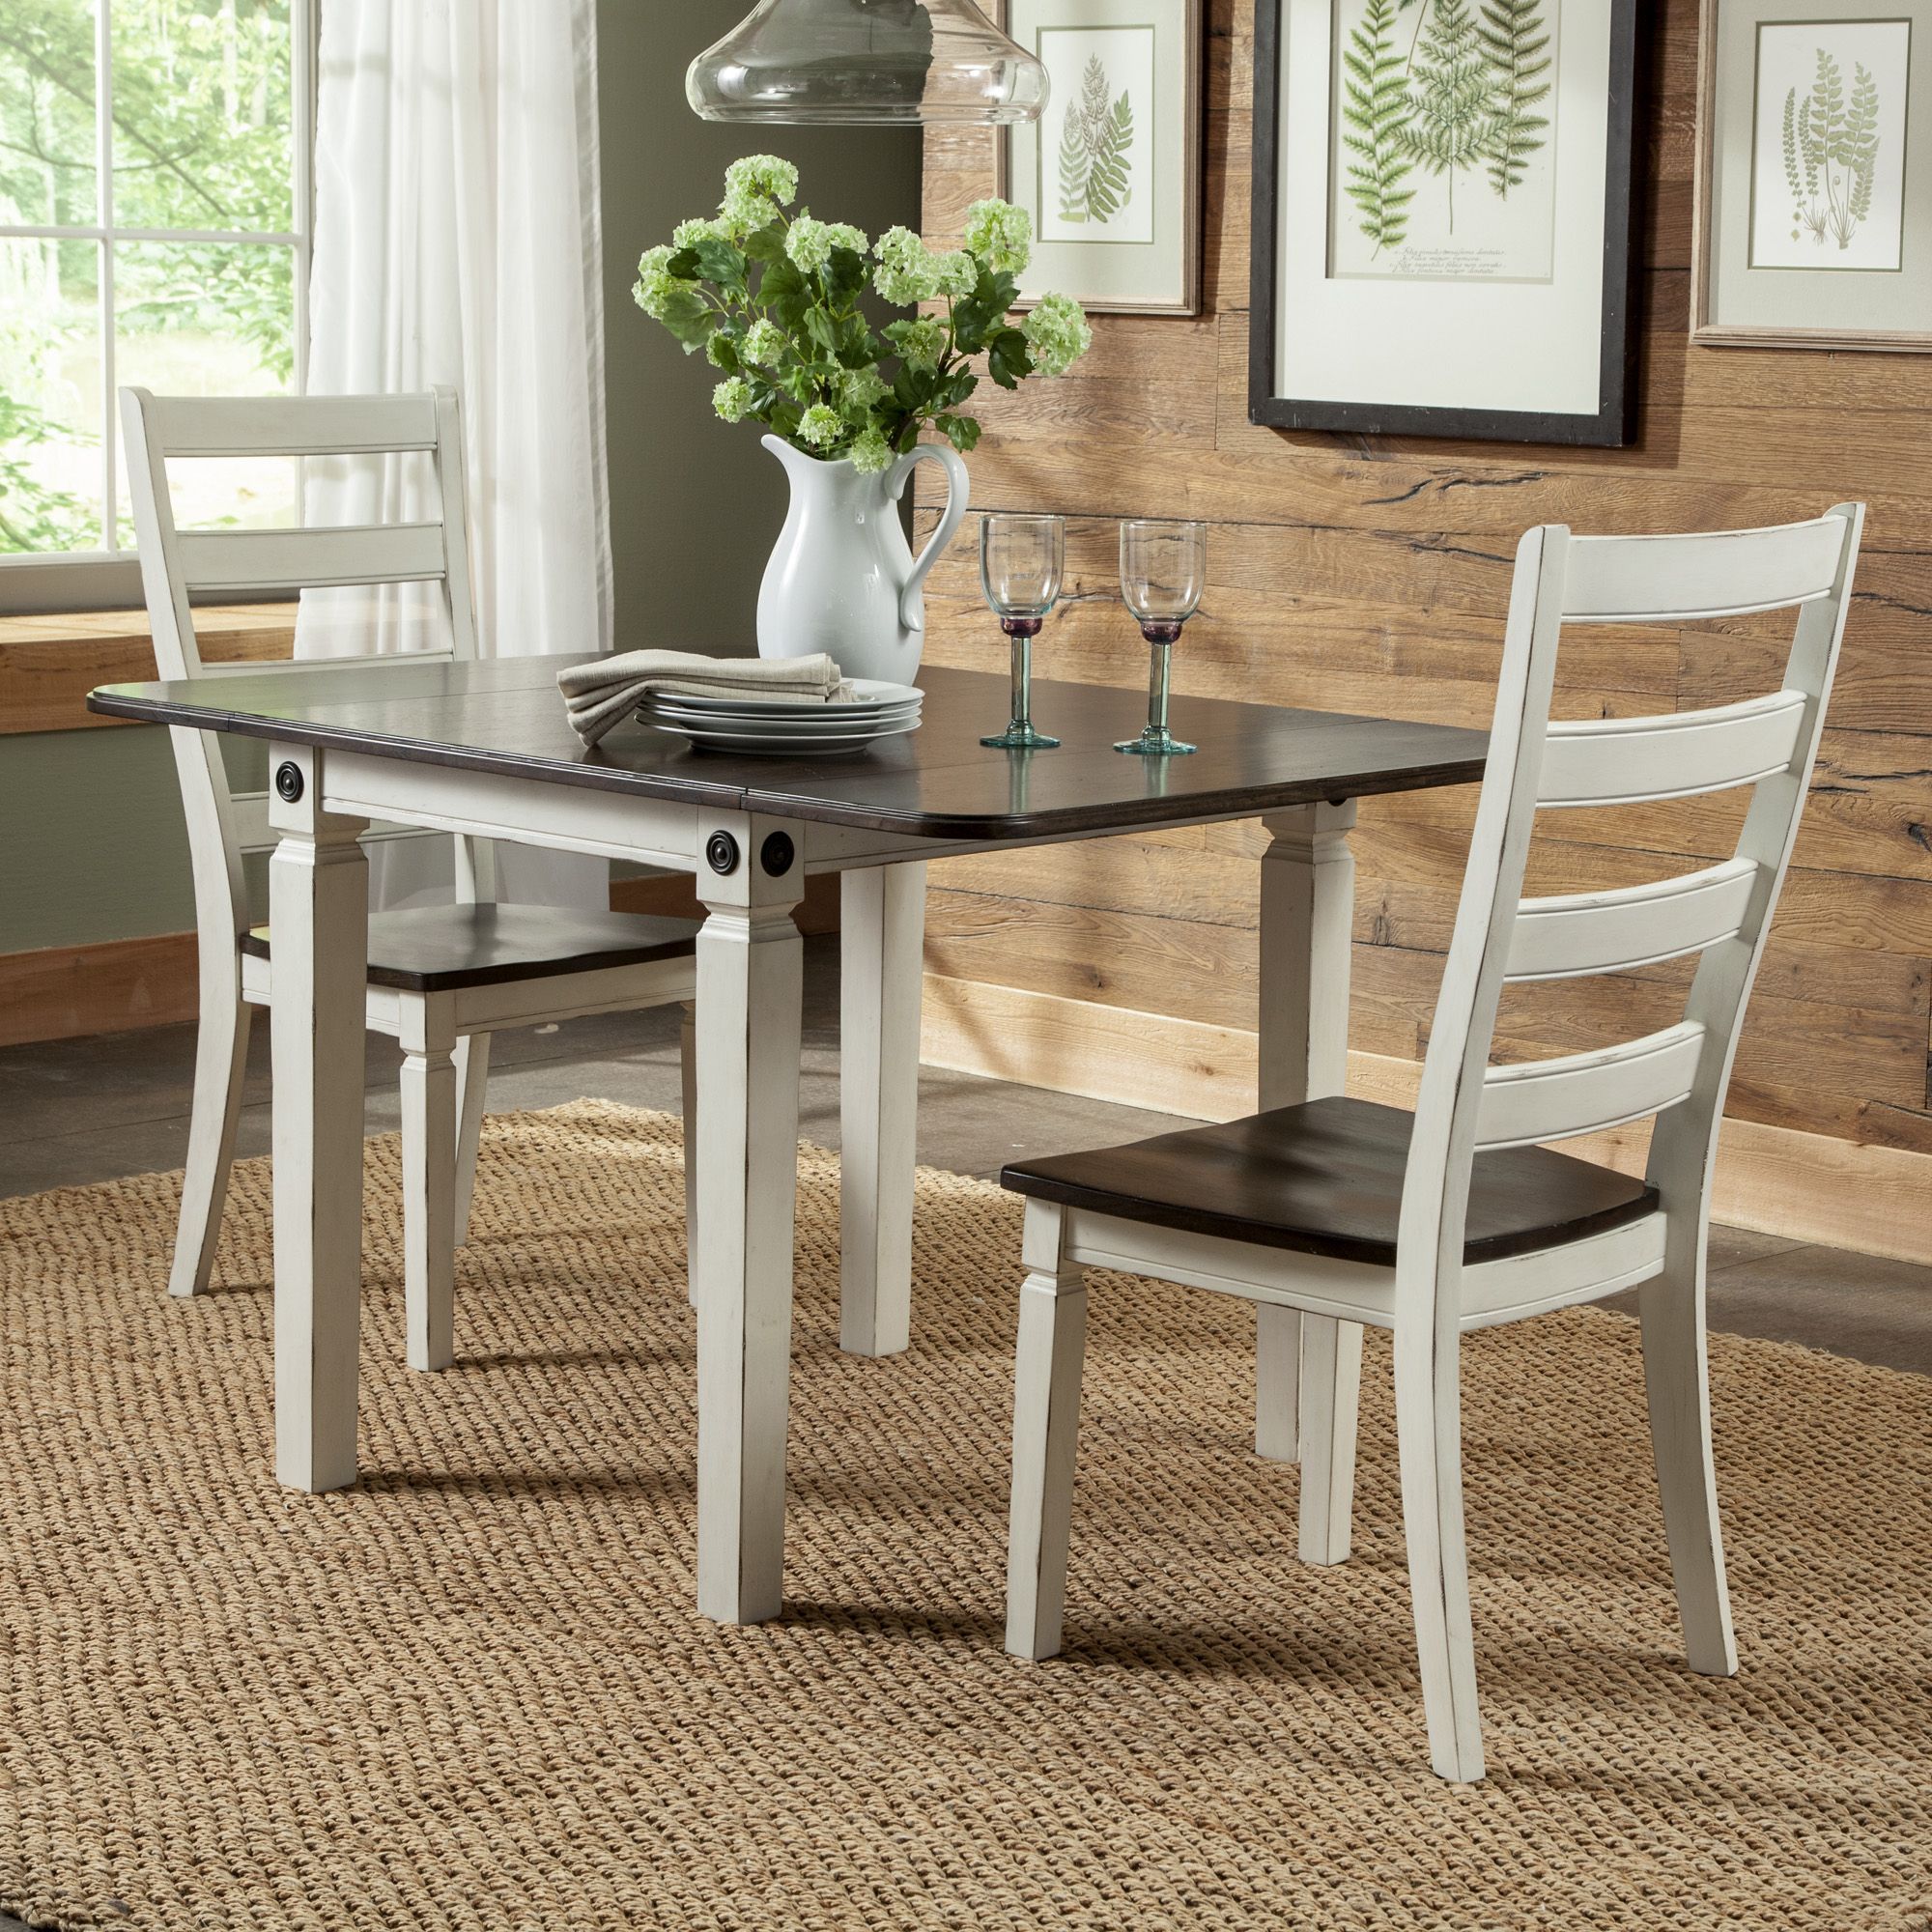 Glennwood Drop Leaf Table | White & Charcoal – Intercon Furniture Regarding White Grained Wood Hexagonal Console Tables (View 15 of 20)